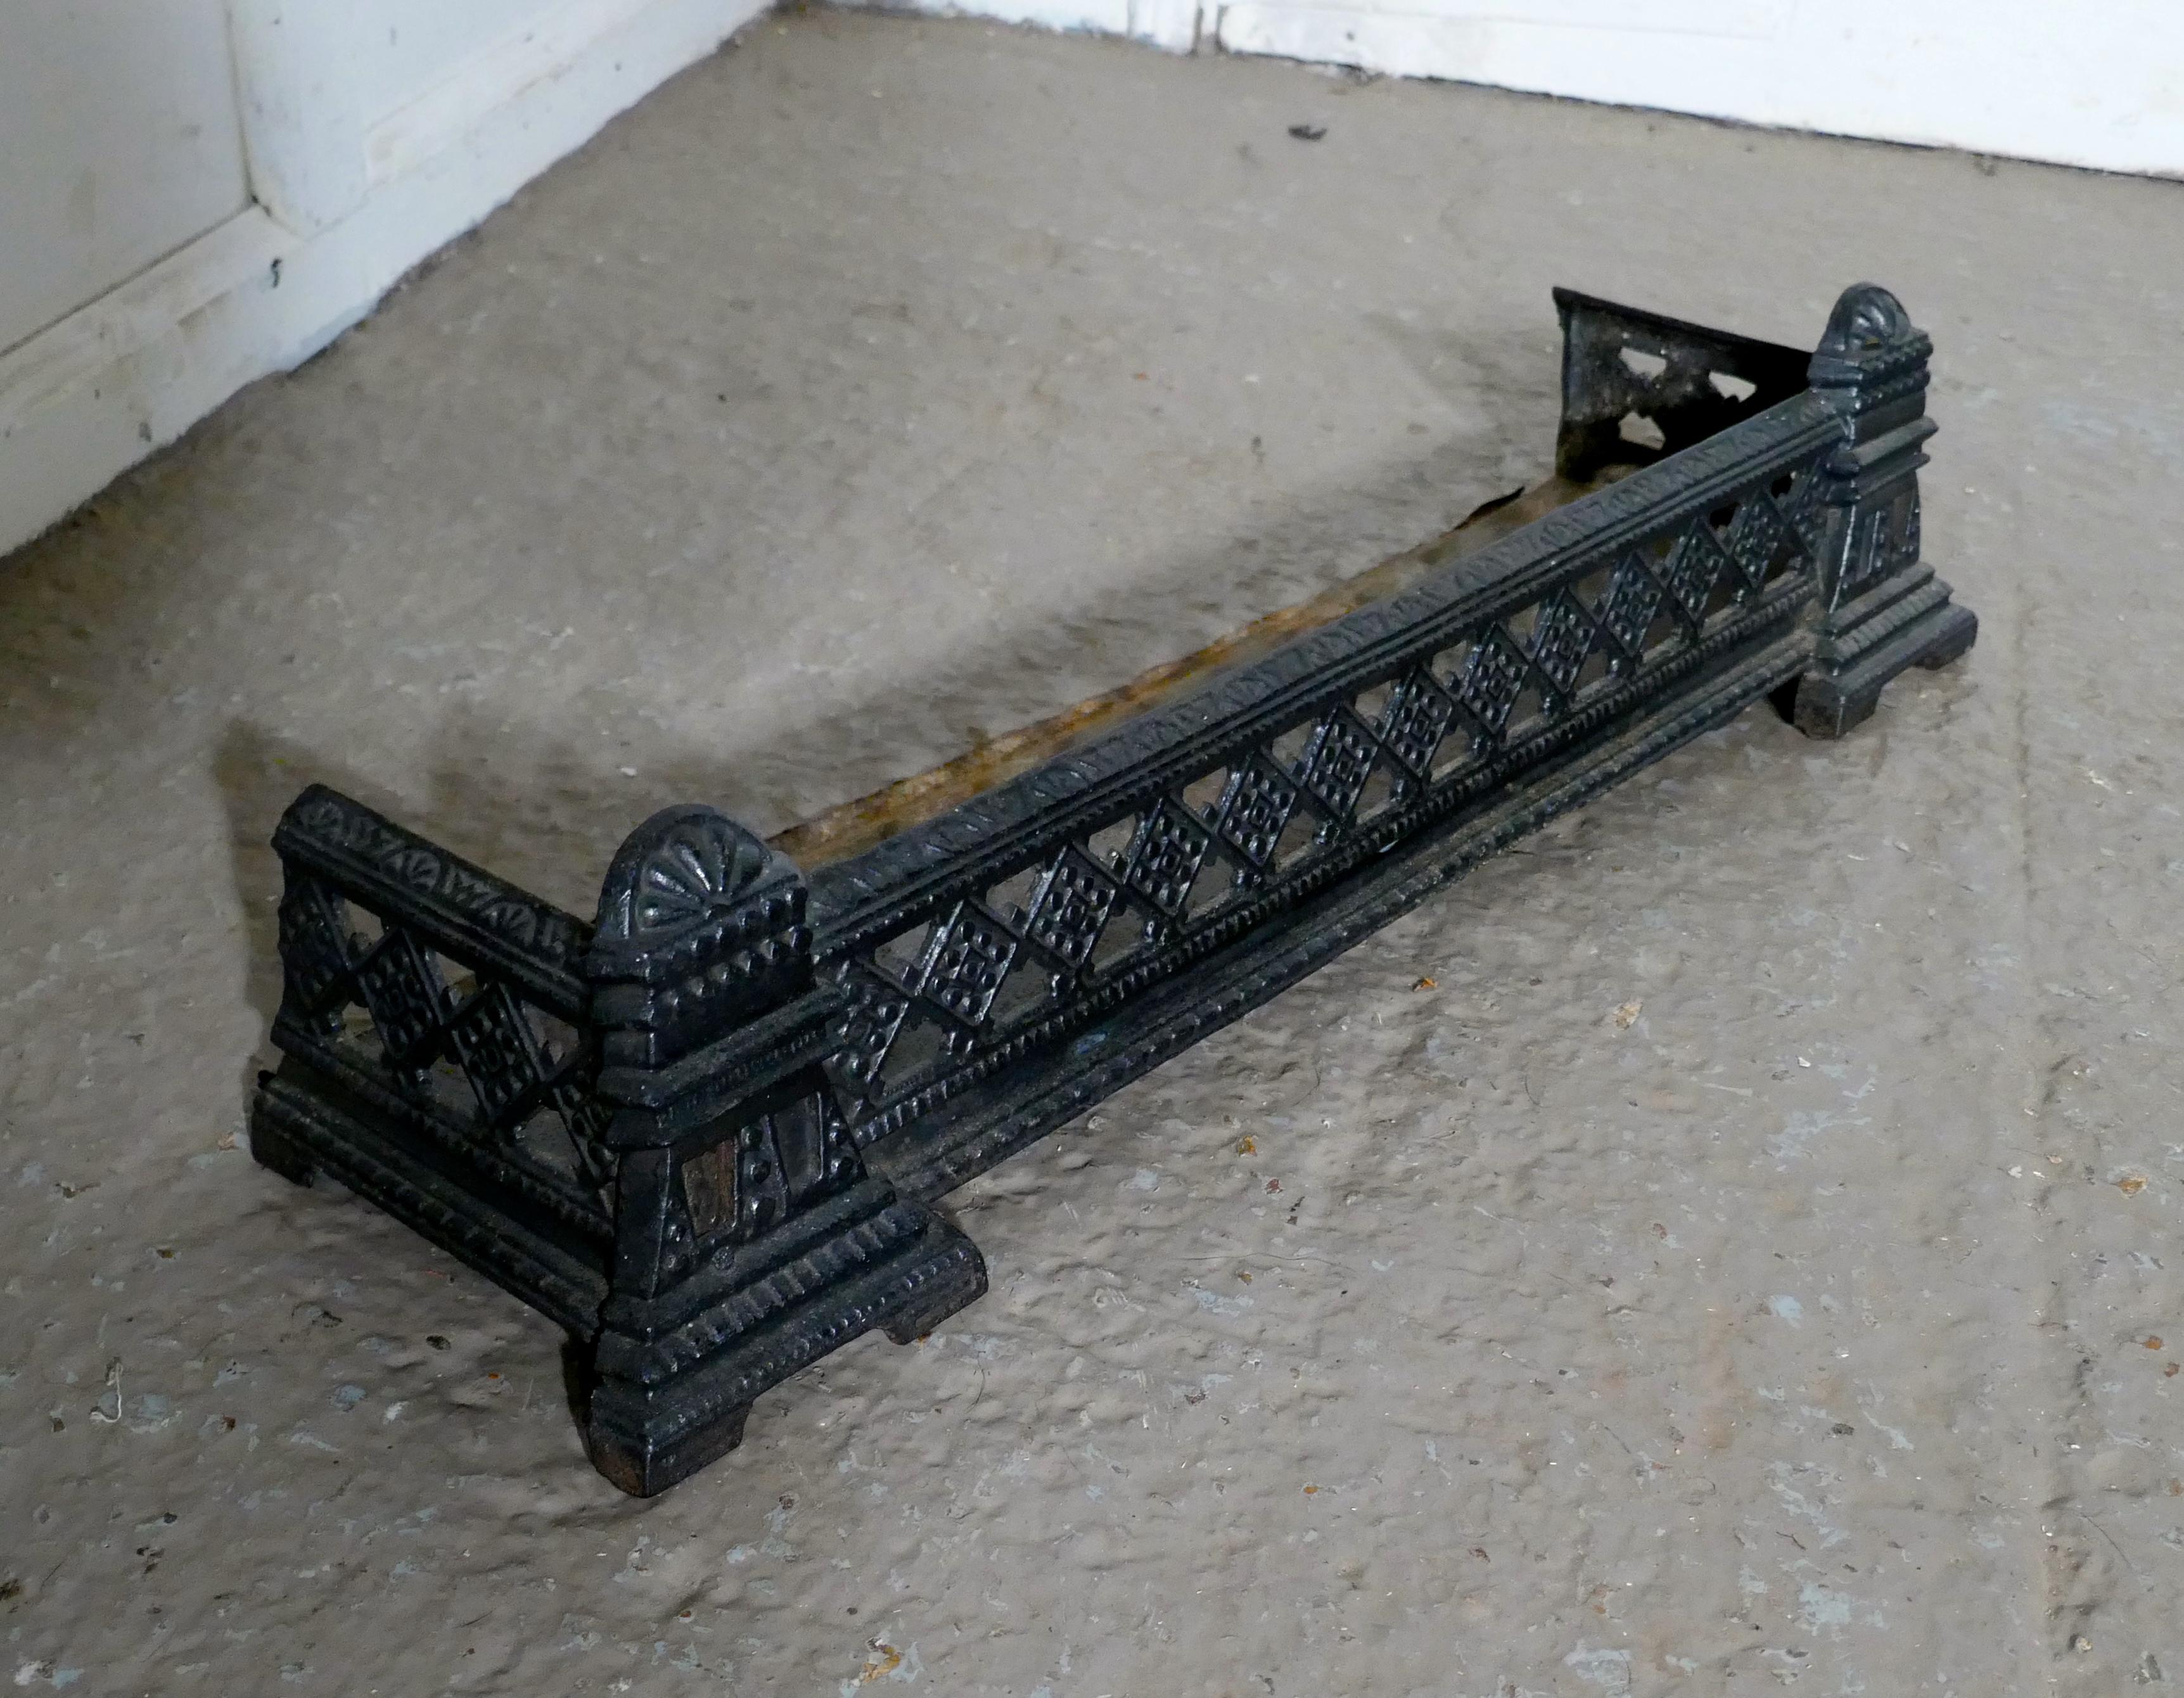 Small Victorian cast iron fender or dog grate

This is a good Victorian fender it is best quality and heavy, fenders like this were known a Dog Grates as they serve to rest the fire tools and keep any rolling ash in check
The fender is in good